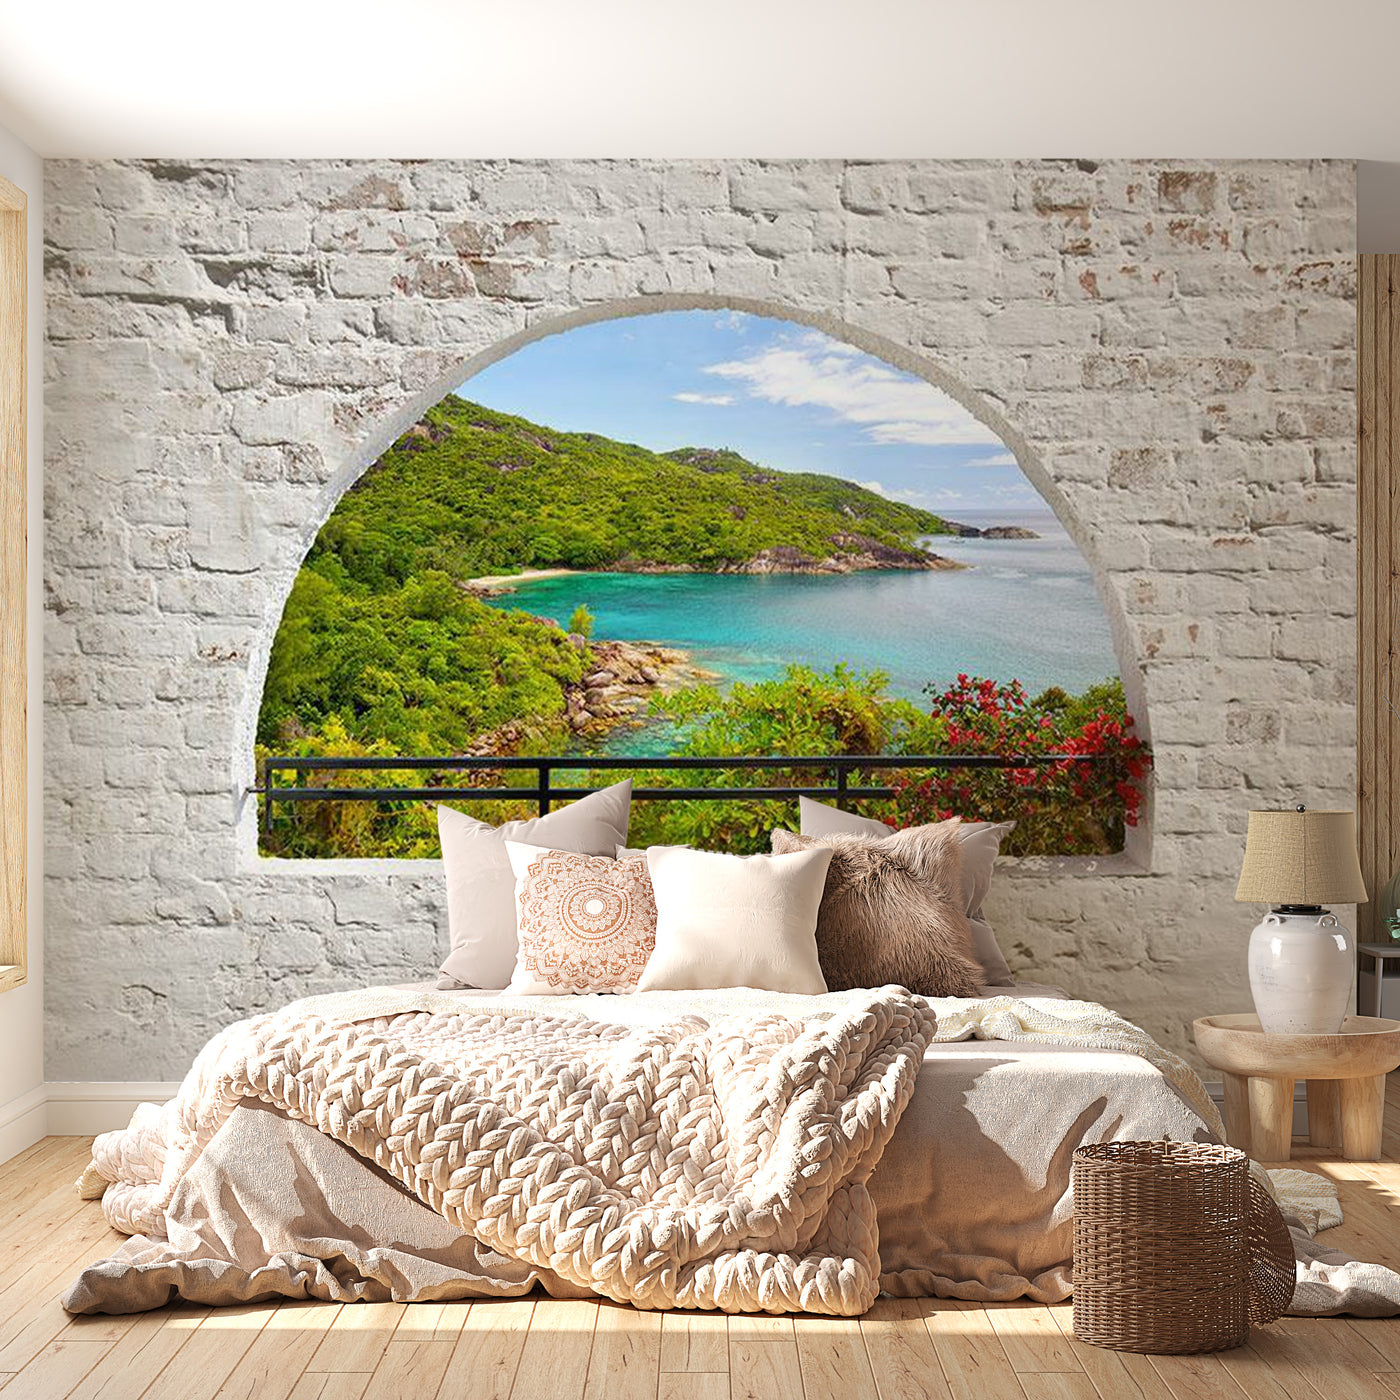 Peel & Stick Tropical Wall Mural - Emerald Island - Removable Wall Decals